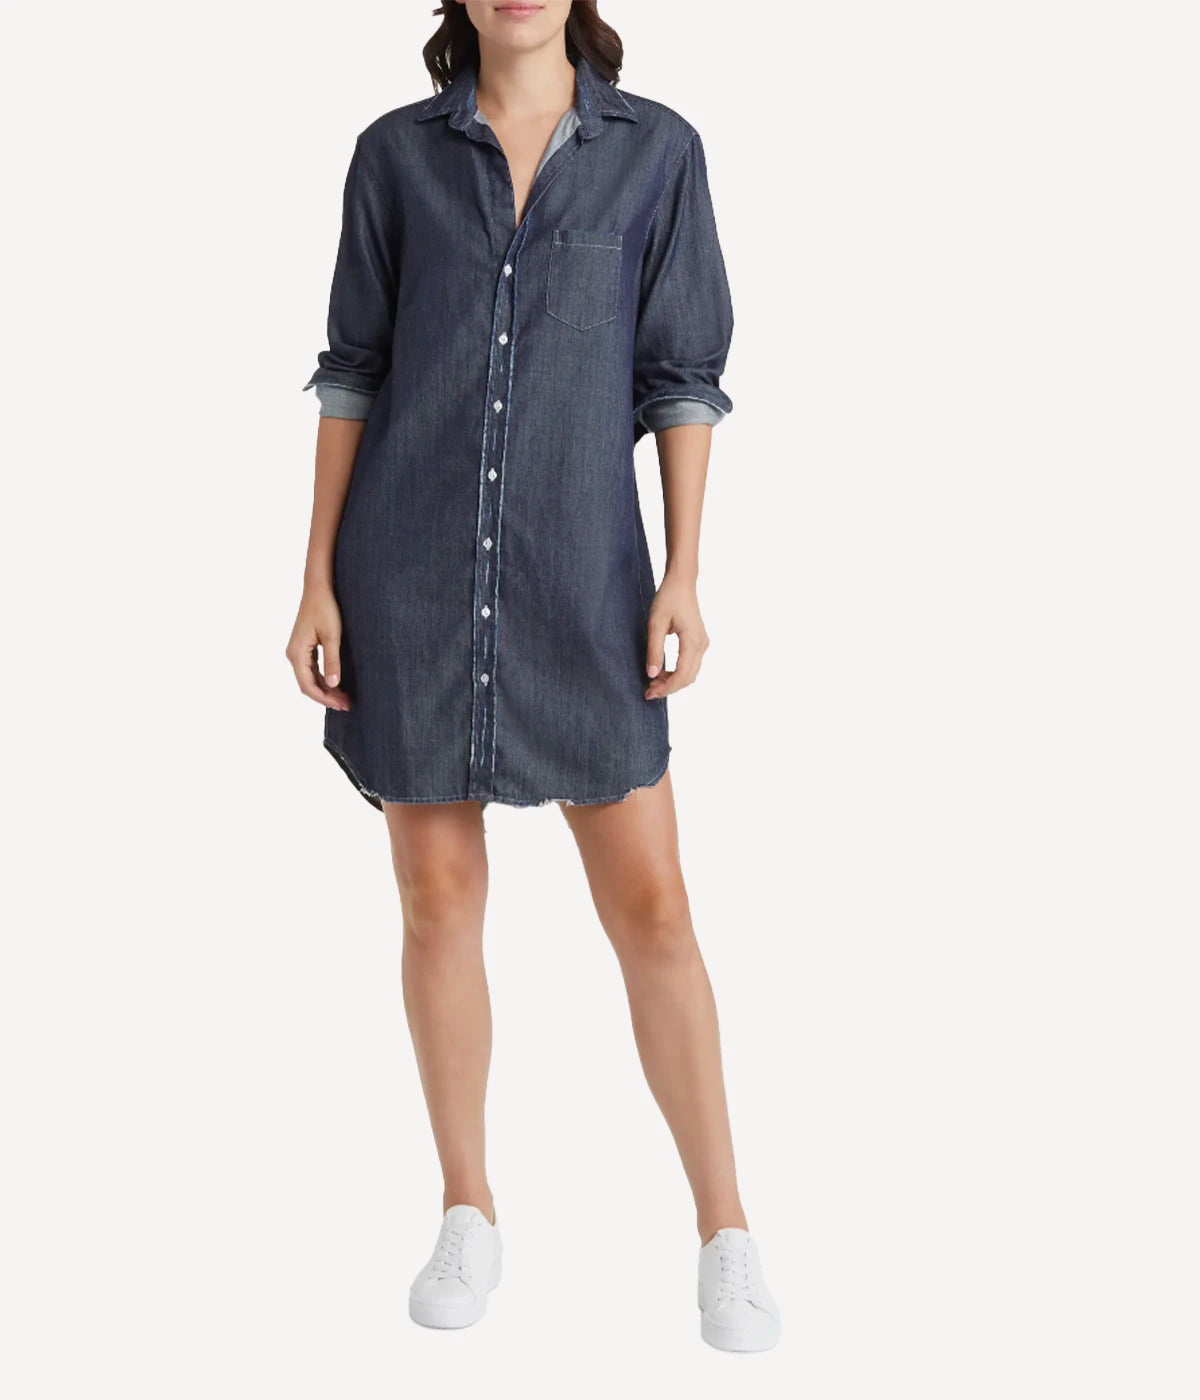 Mary Woven Button Up Dress in Distressed Rinse Denim